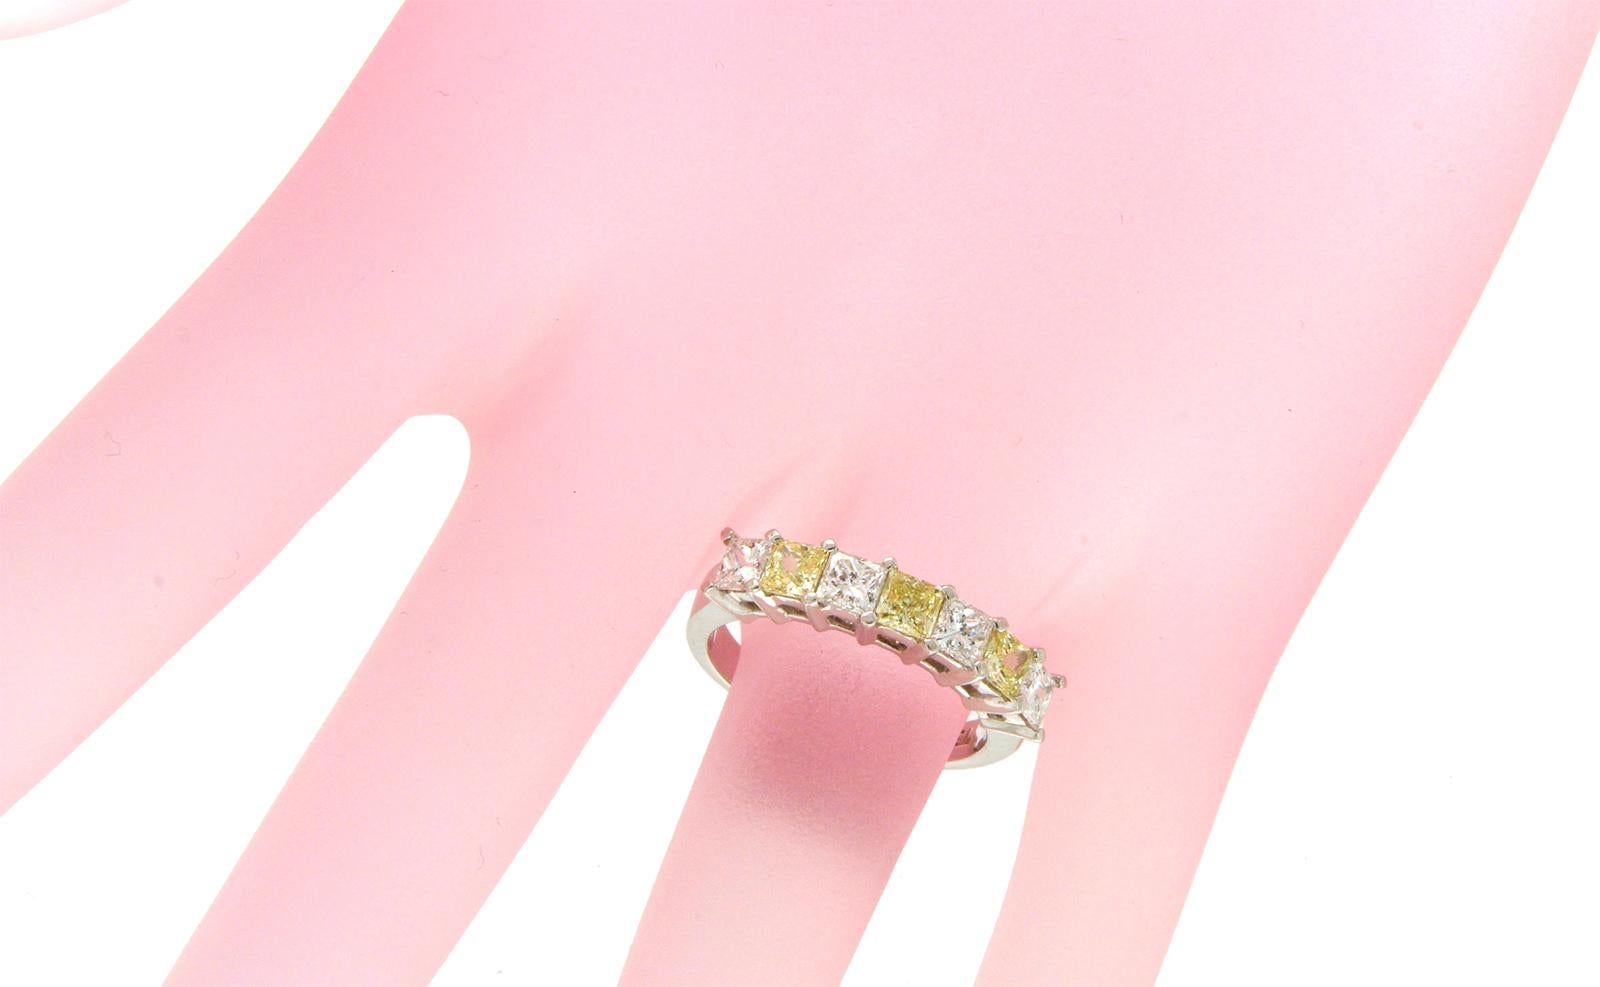 Type: Ring
Top: 3.5 mm
Band Width: 2.5 mm
Metal: White Gold
Metal Purity: 18K
Size:6-9
Hallmarks: 750
Total Weight: 4.9 Grams
Stone Type: 1.54 Ct Yellow and White Diamonds SI1-VS2 G-H
Condition: New
Stock Number: DR112-2